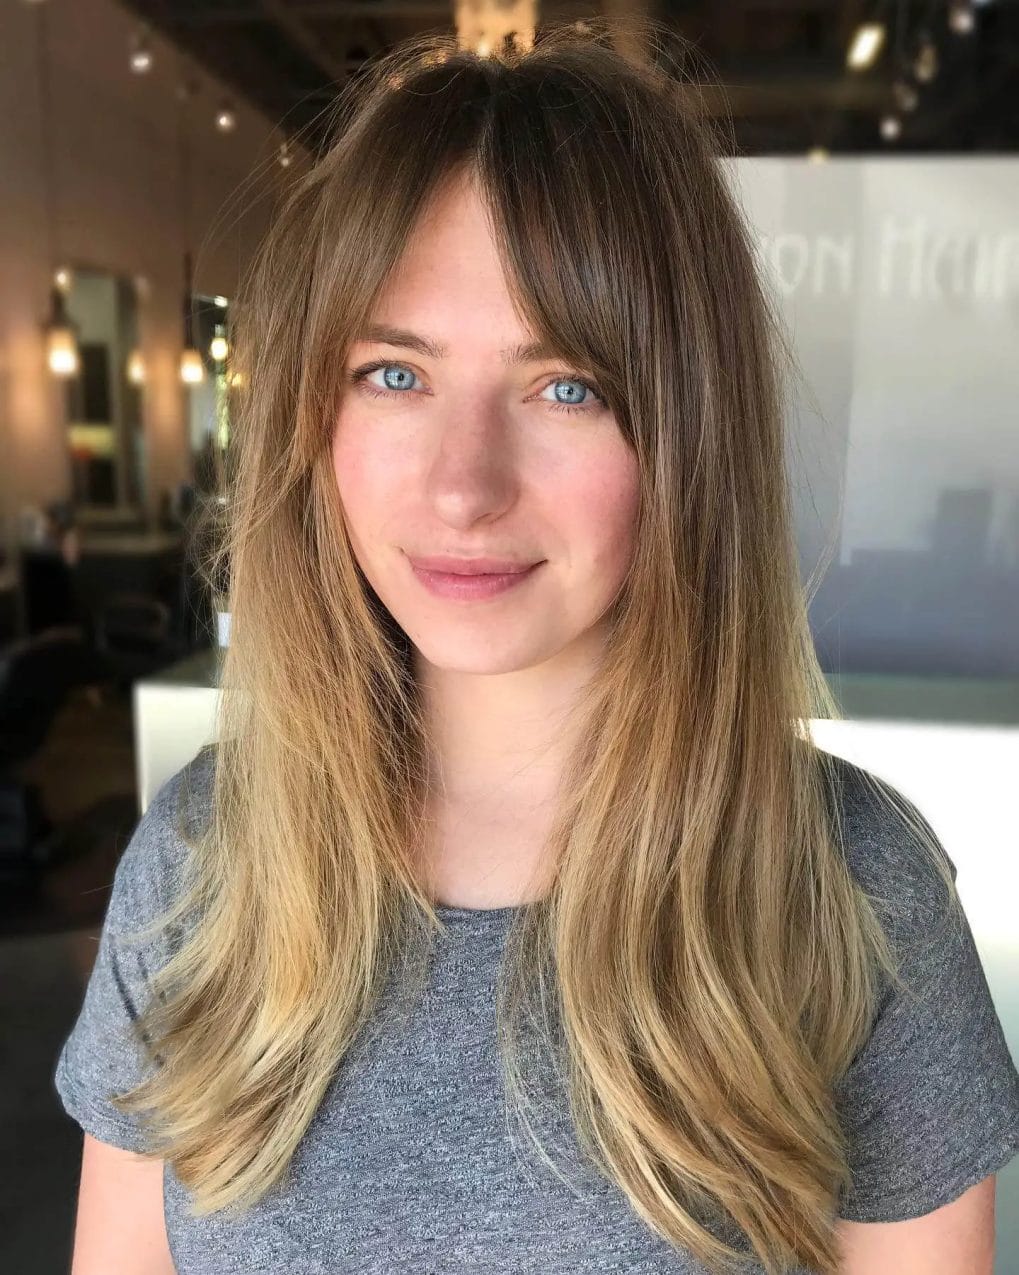 Layered locks with a sun-kissed ombre transitioning from deep brown, complemented with curtain bangs.